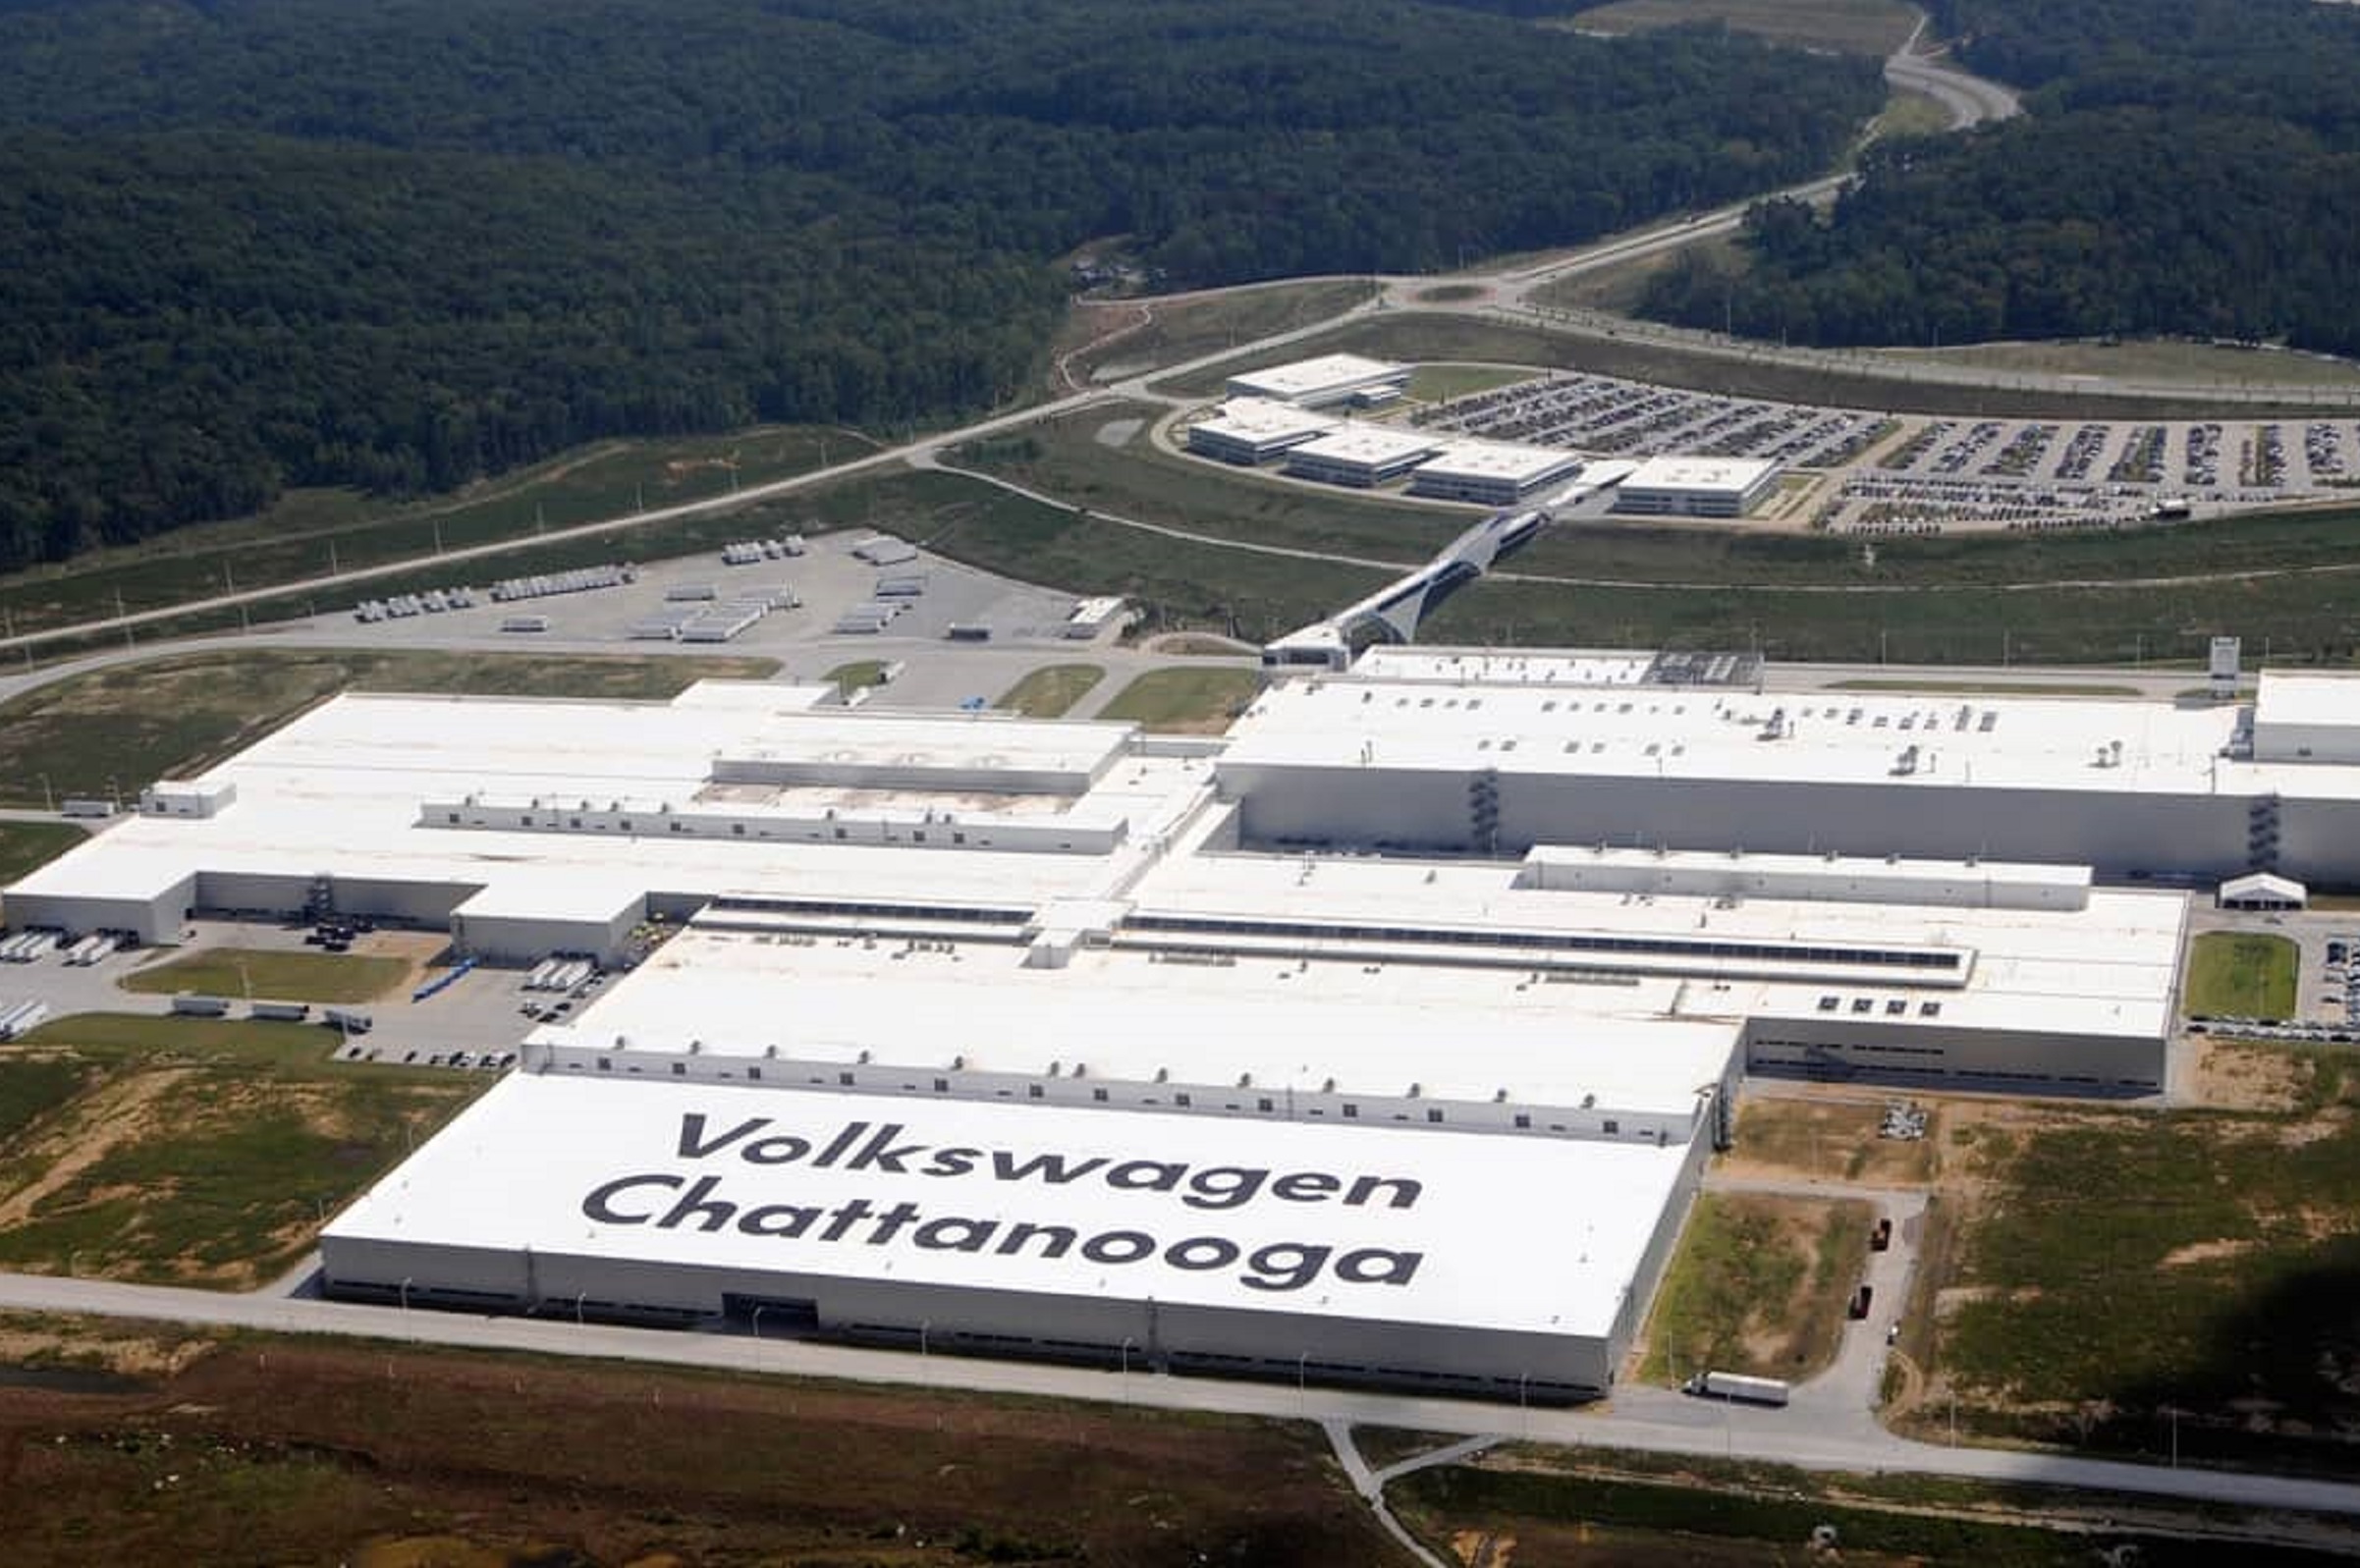 Volkswagen Battery Test Facility